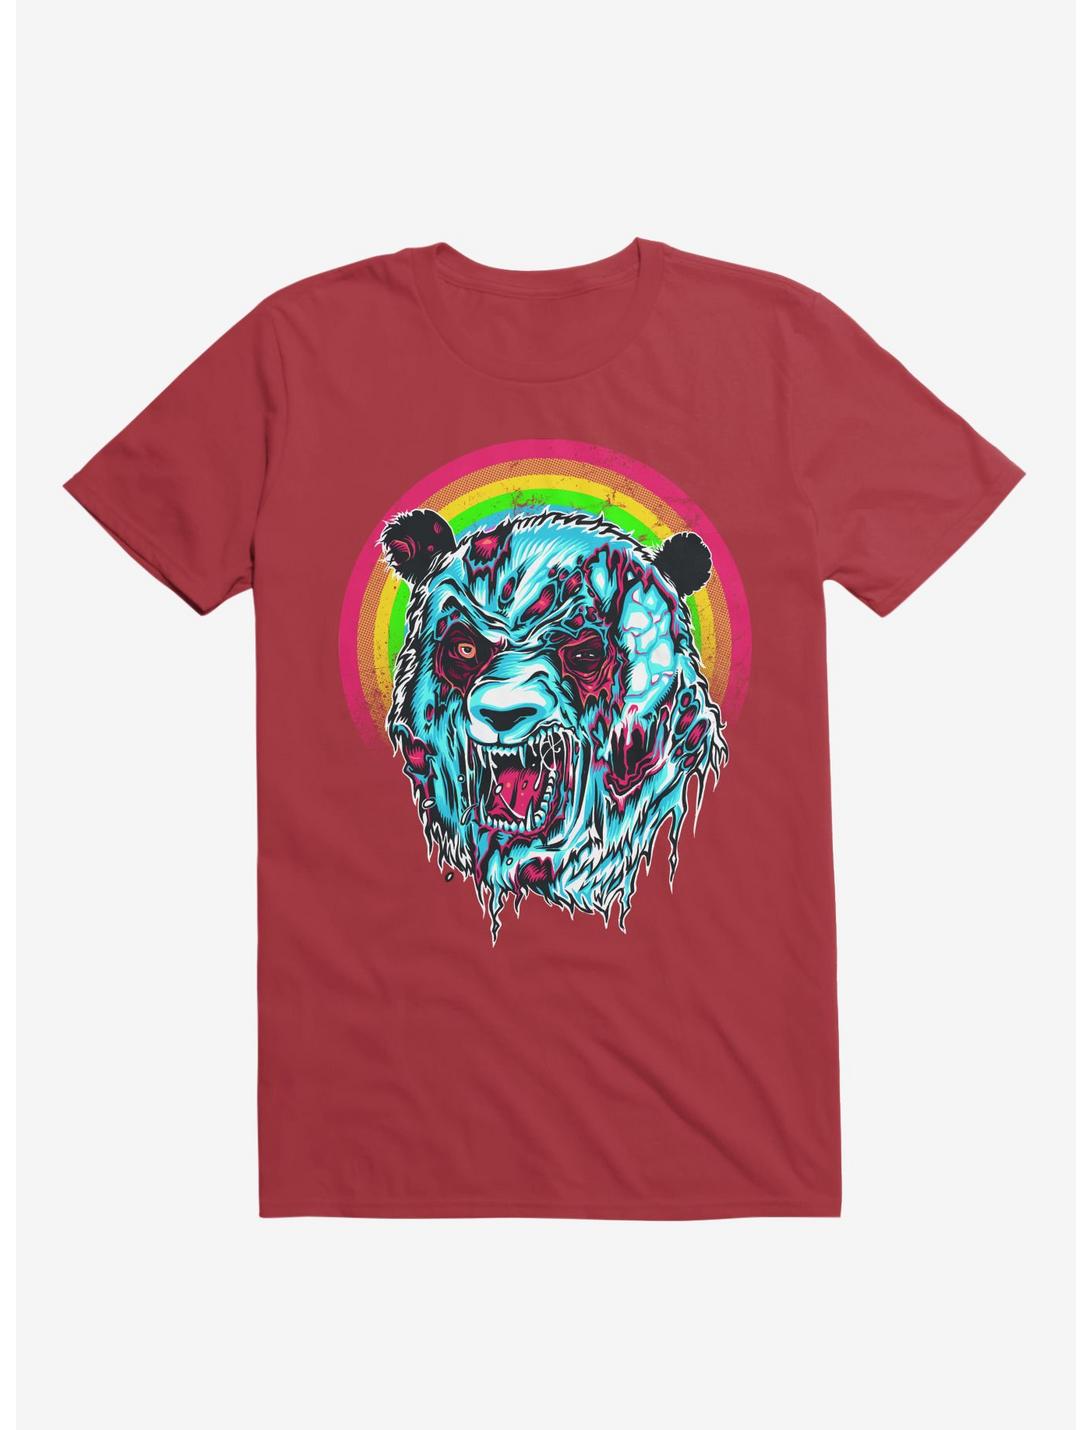 Zombie Blood Rainbow Panda Red T-Shirt, RED, hi-res